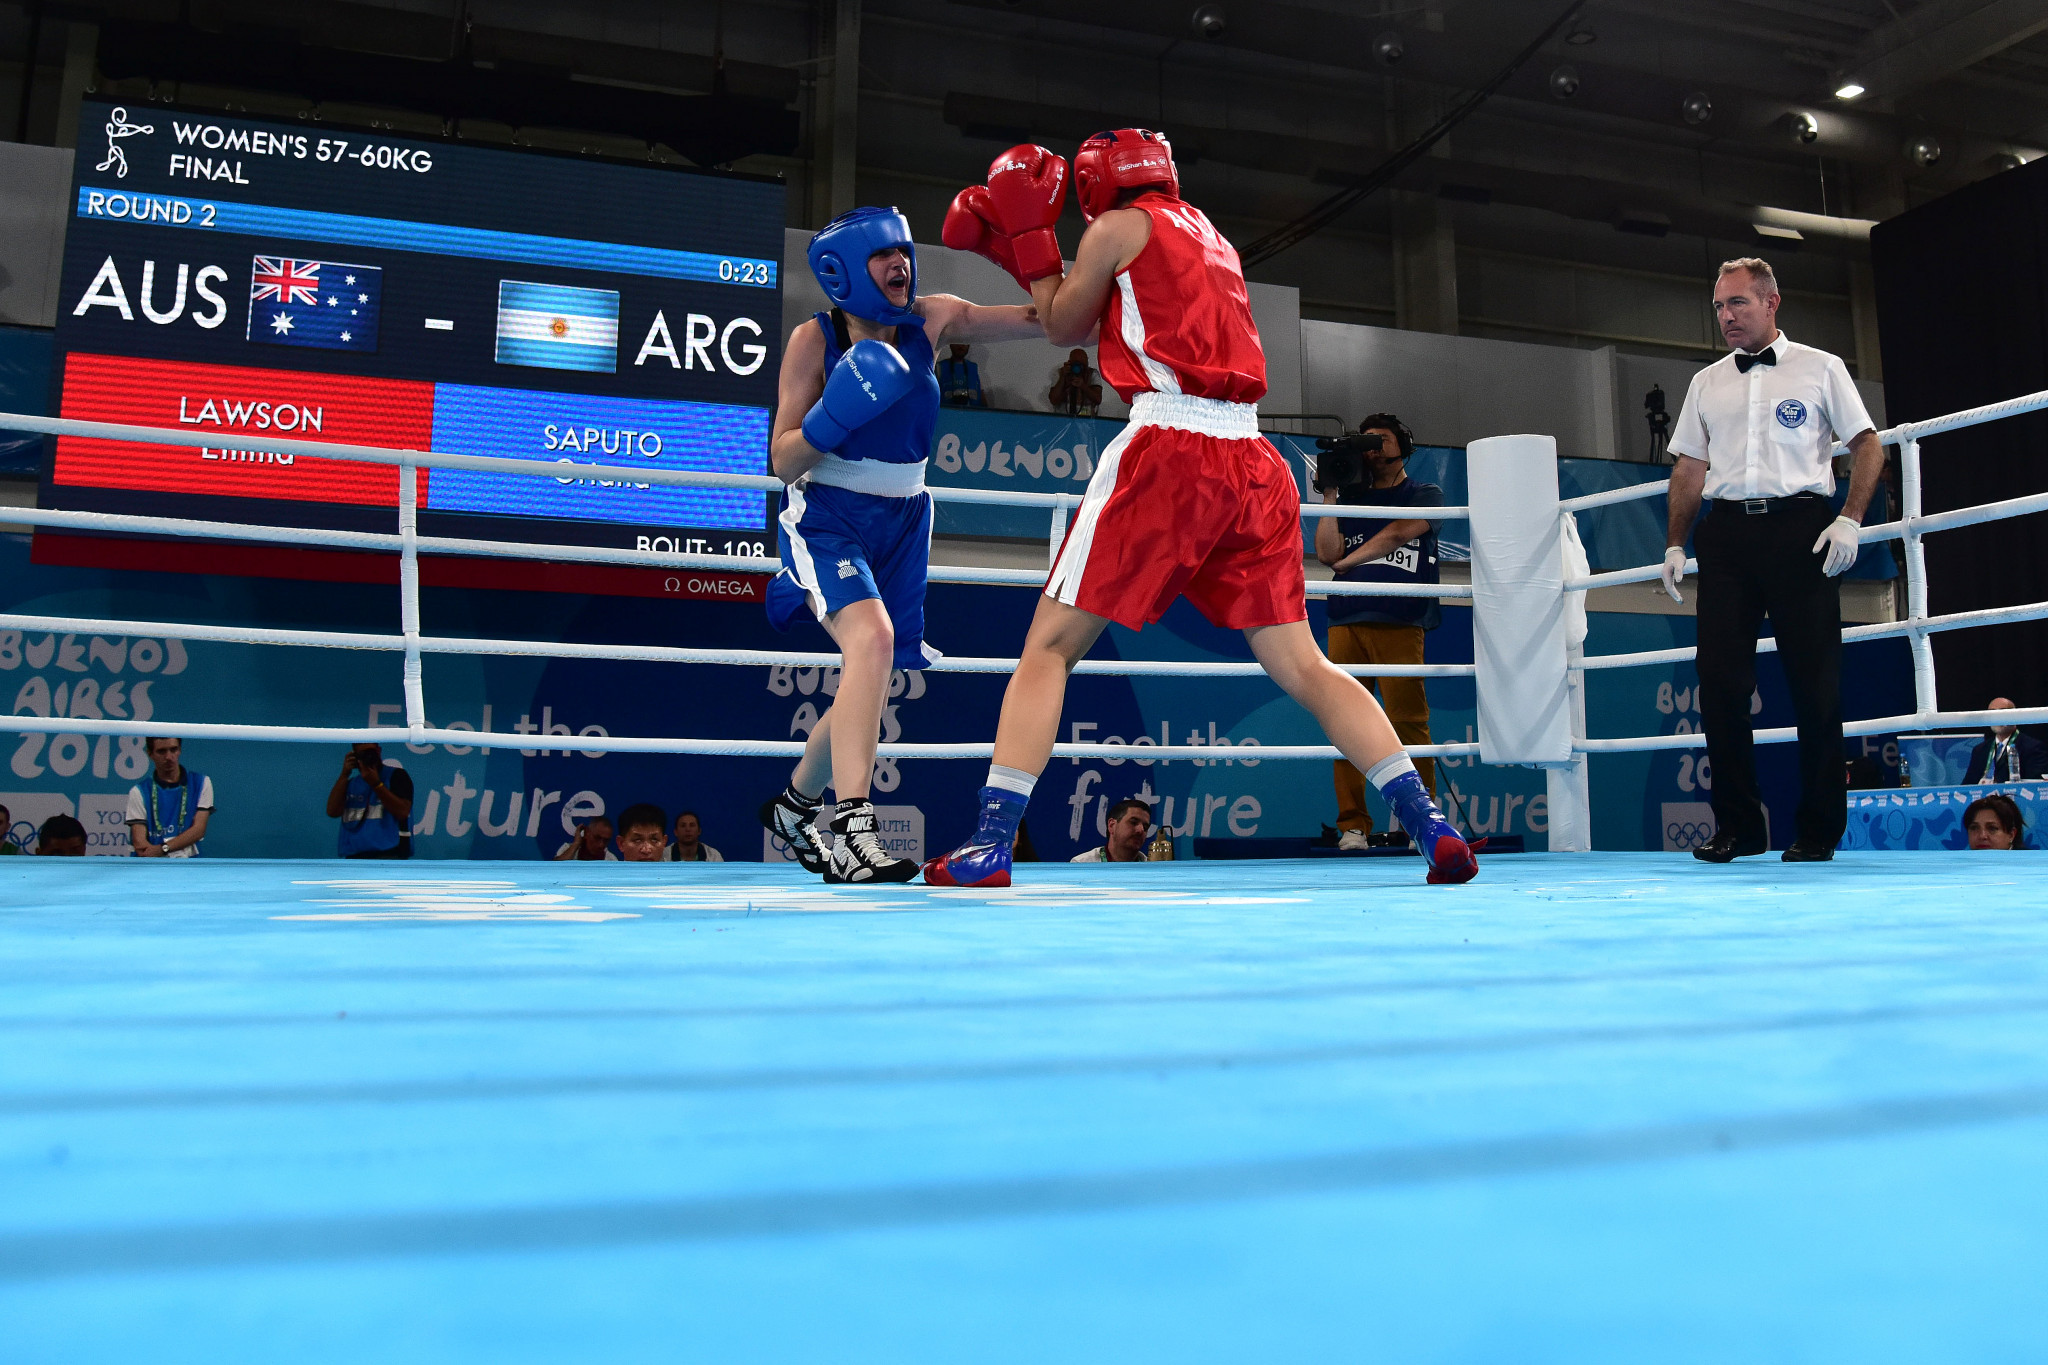 The Polish Boxing Association has confirmed one participant has tested positive for COVID-19 and has been ruled out of the event ©Getty Images